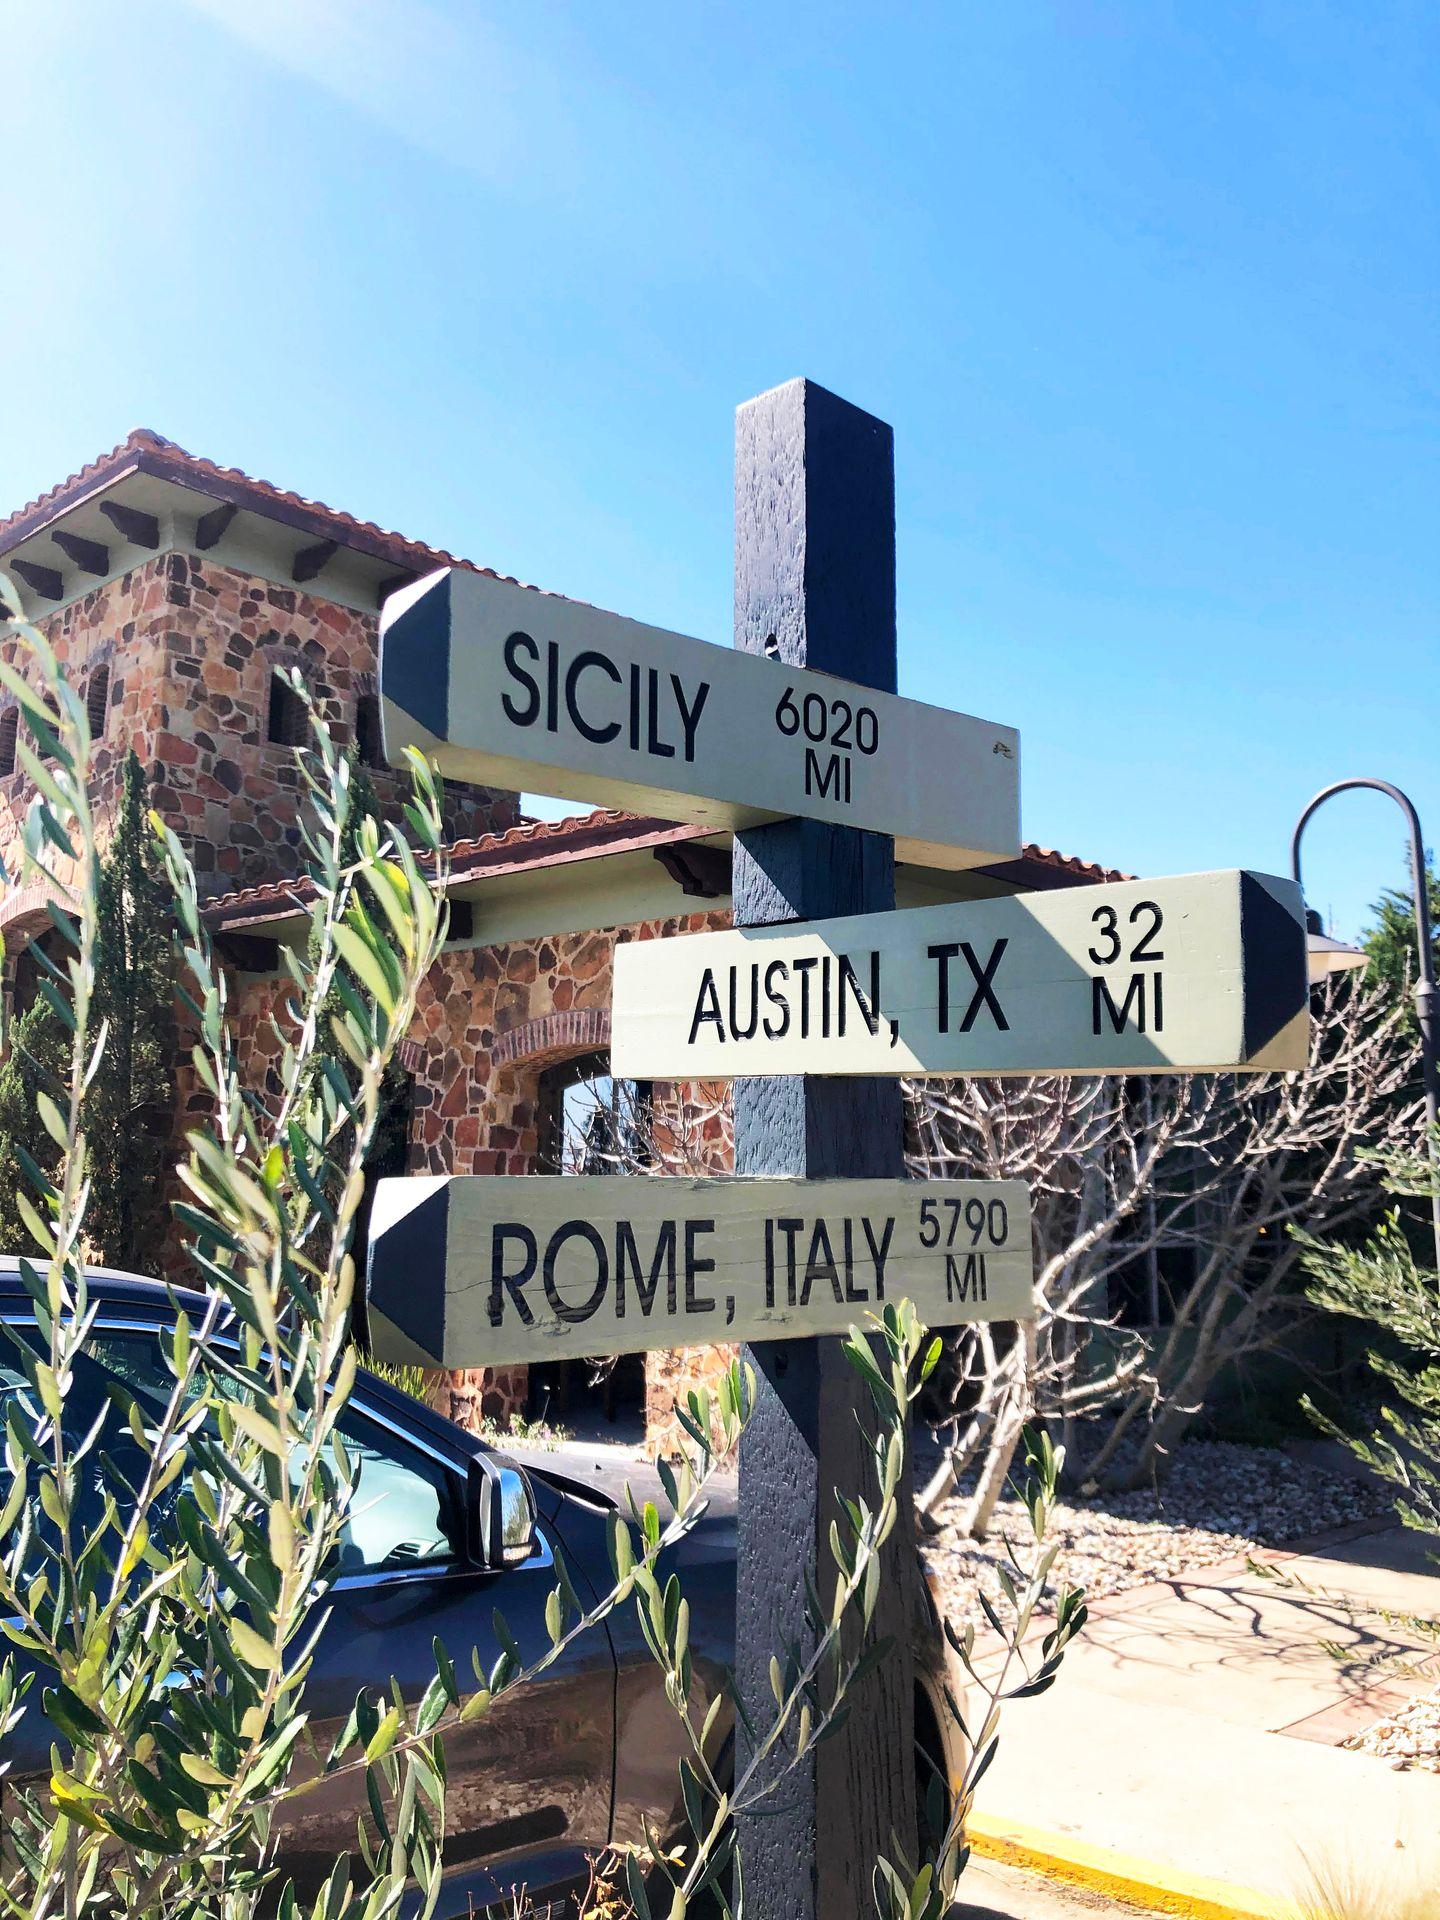 A sign post that shows the distances from Austin, Sicily and Rome